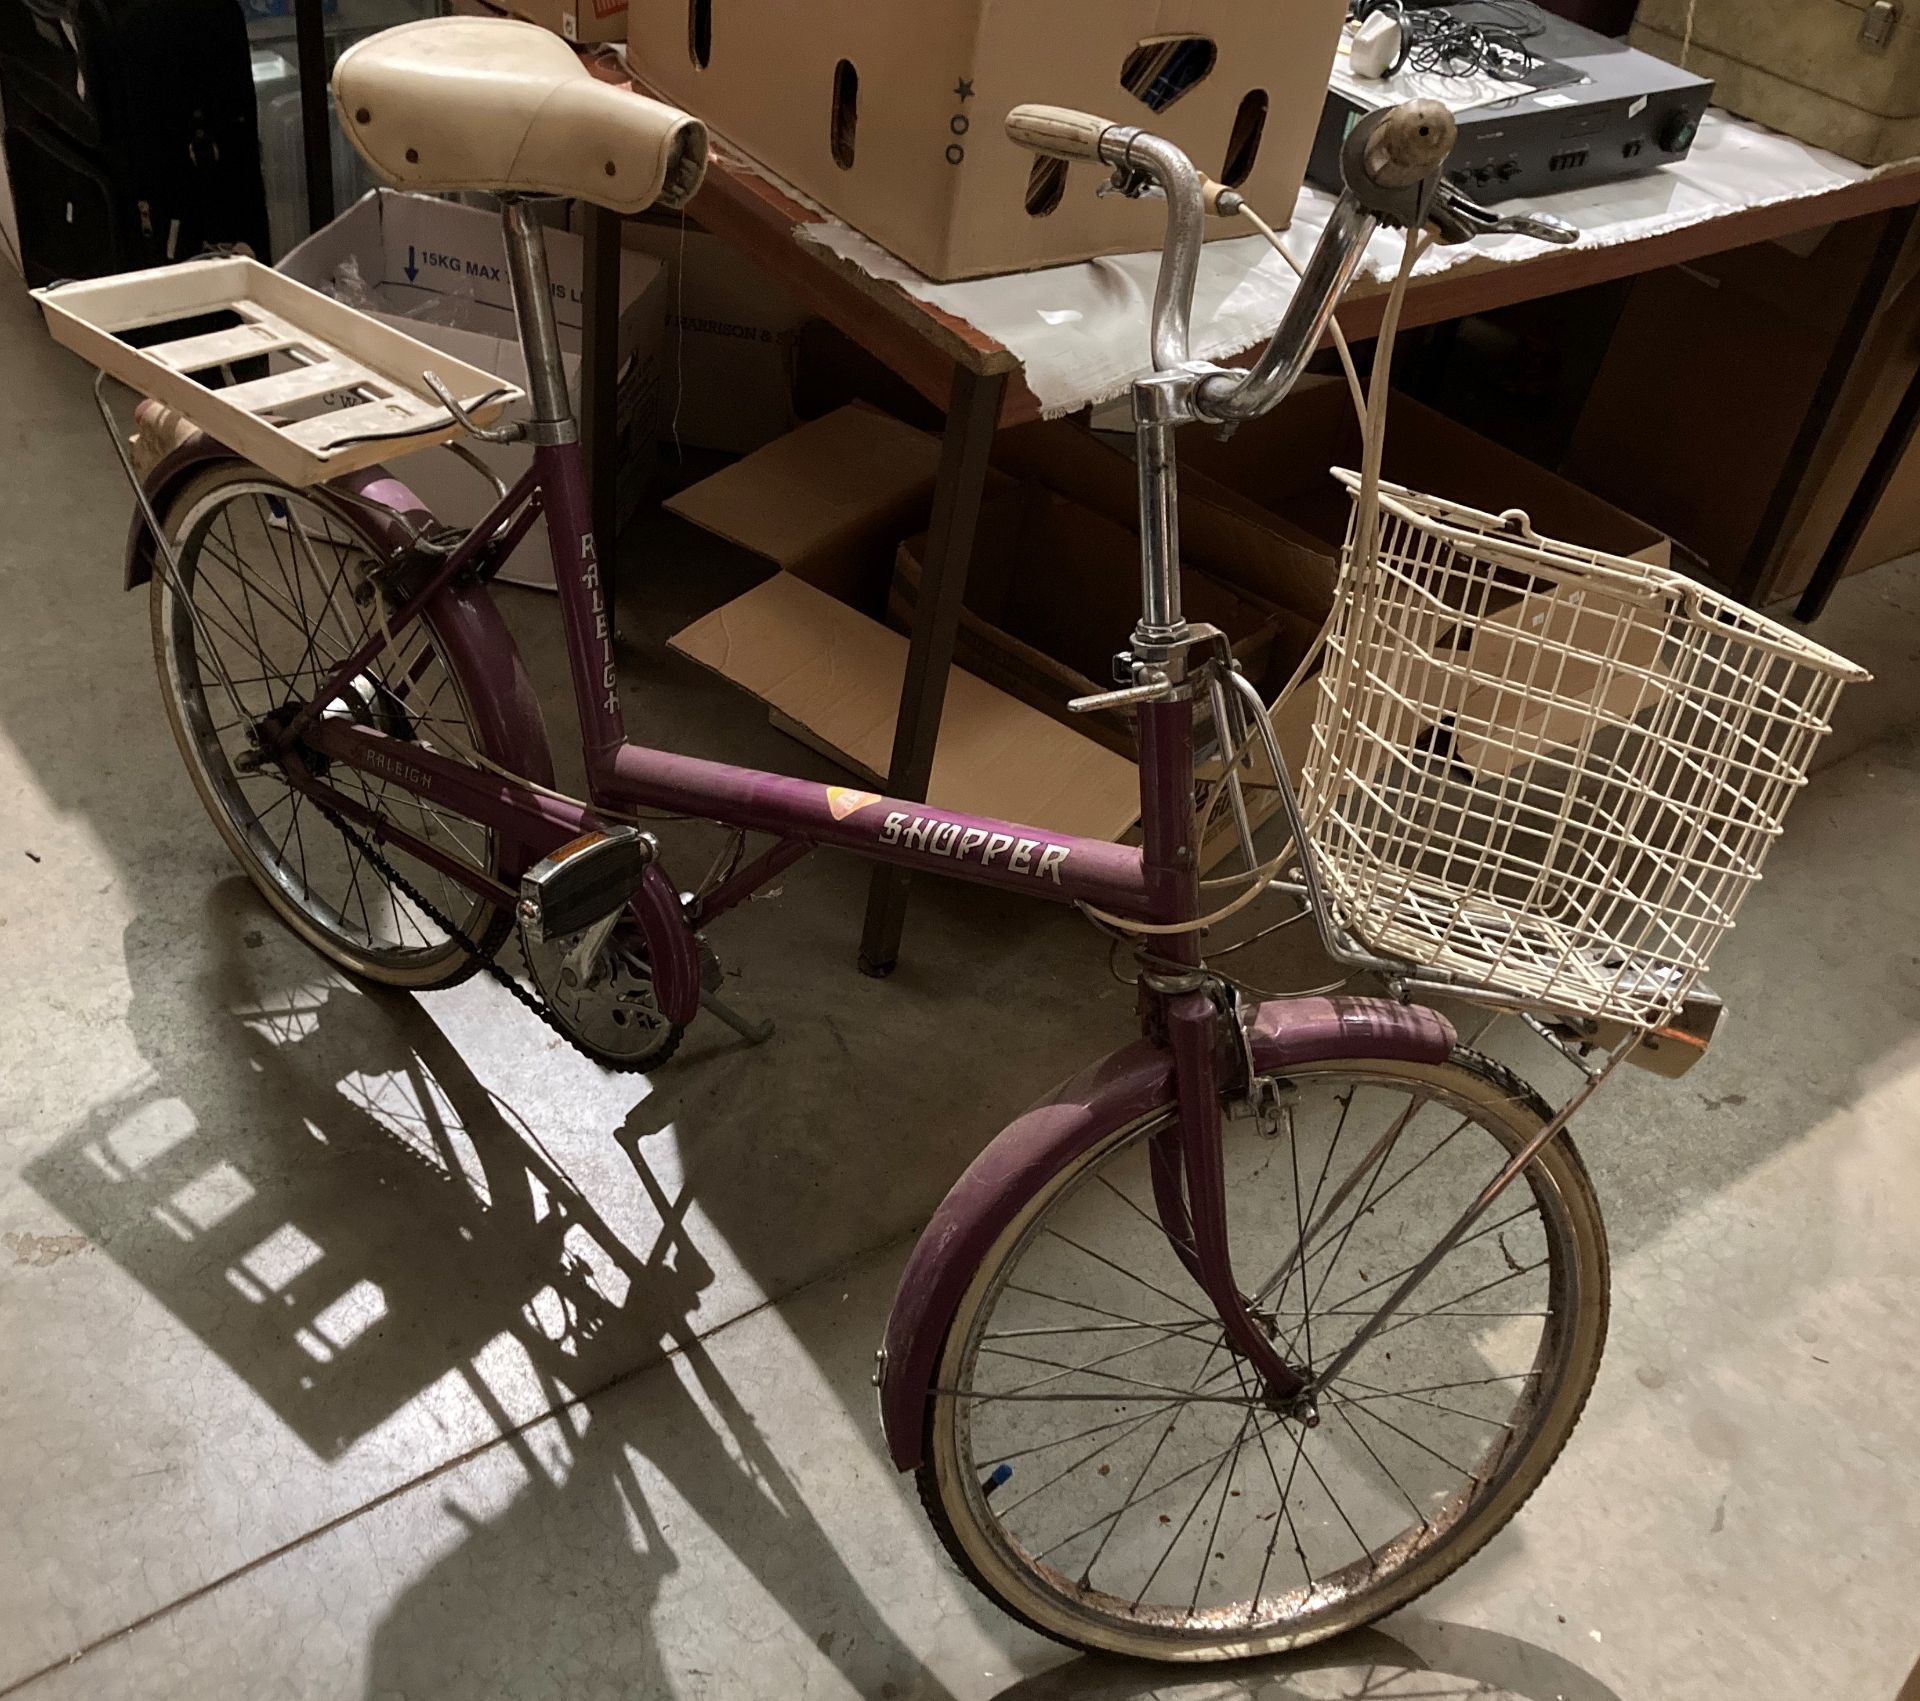 A Releigh Shopper bicycle in purple (saleroom location: S1QA06)